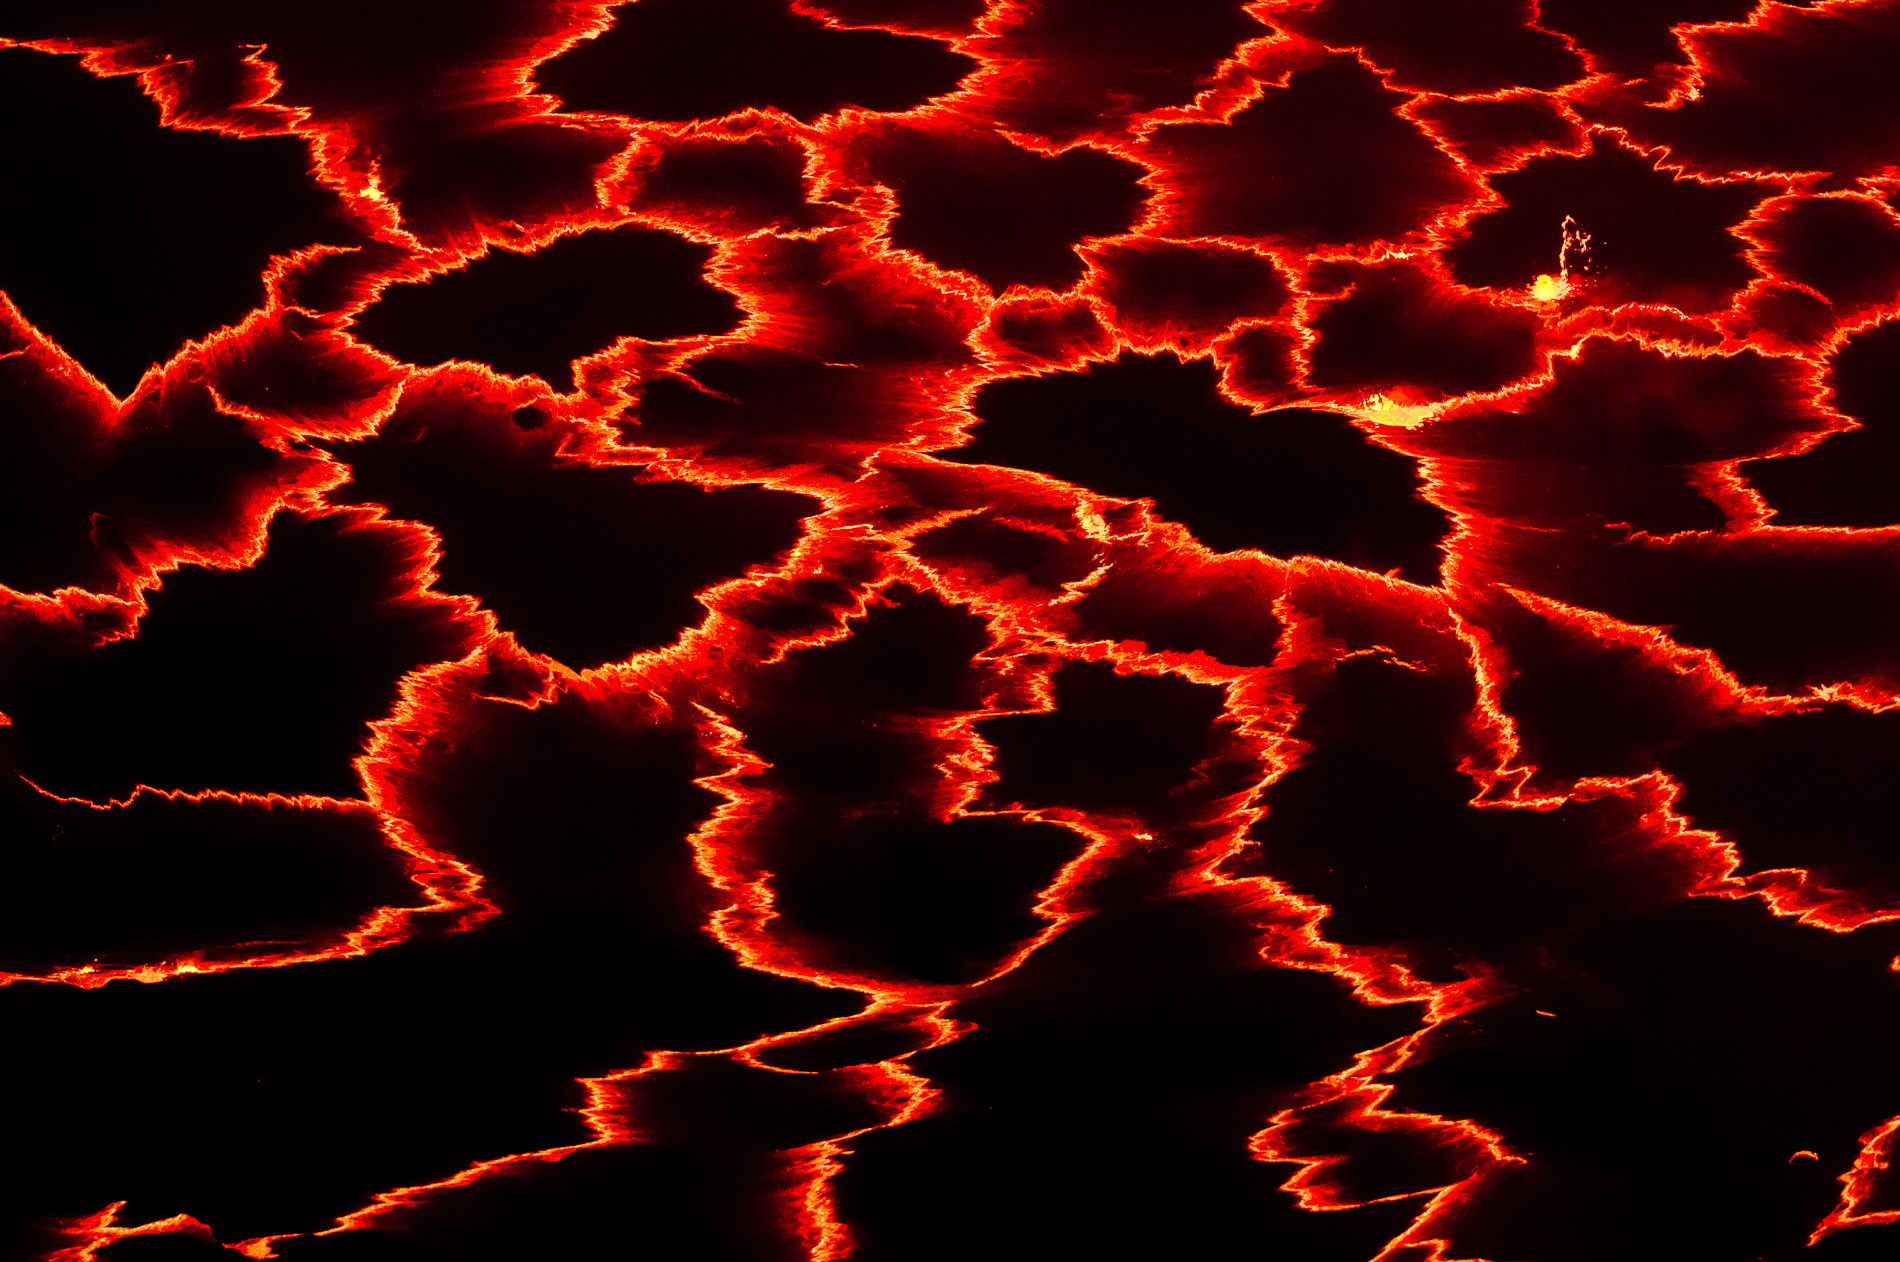 The lava lake is in permanent motion. At night the lava crust tears and dramatic stripes take shape according to the movements of the molten lava. Congo.